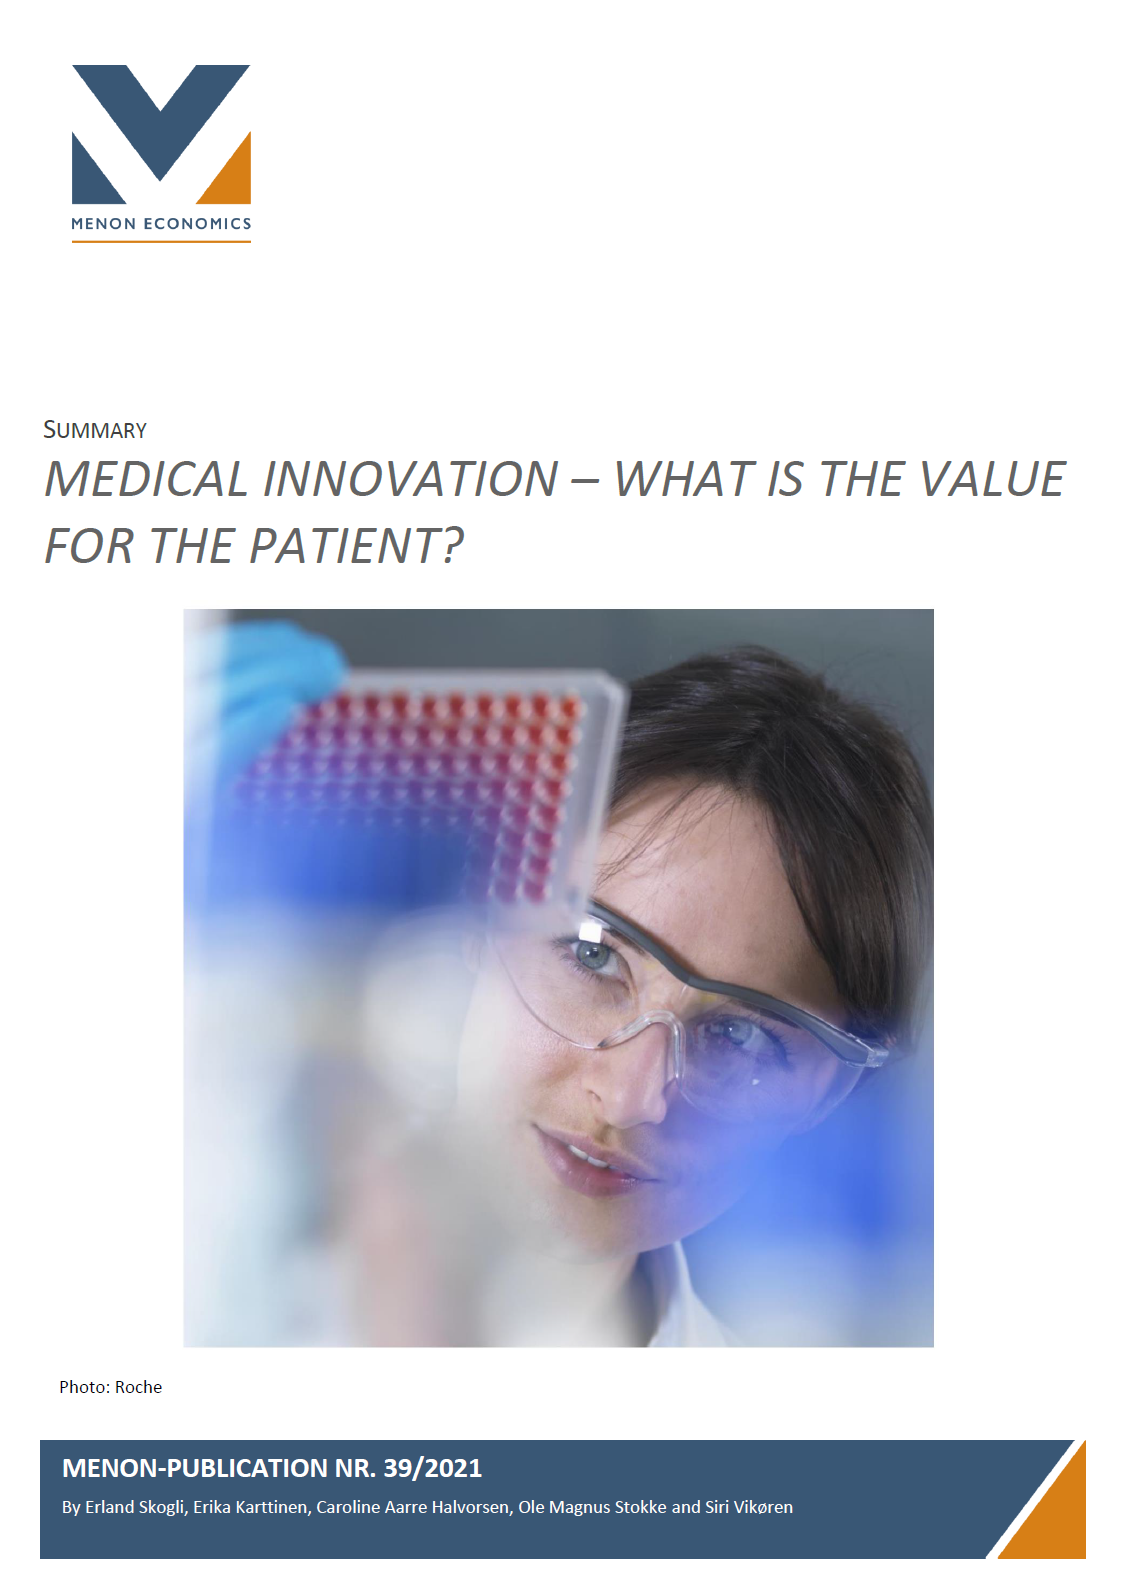 Medical innovation – What is the value for the patient?